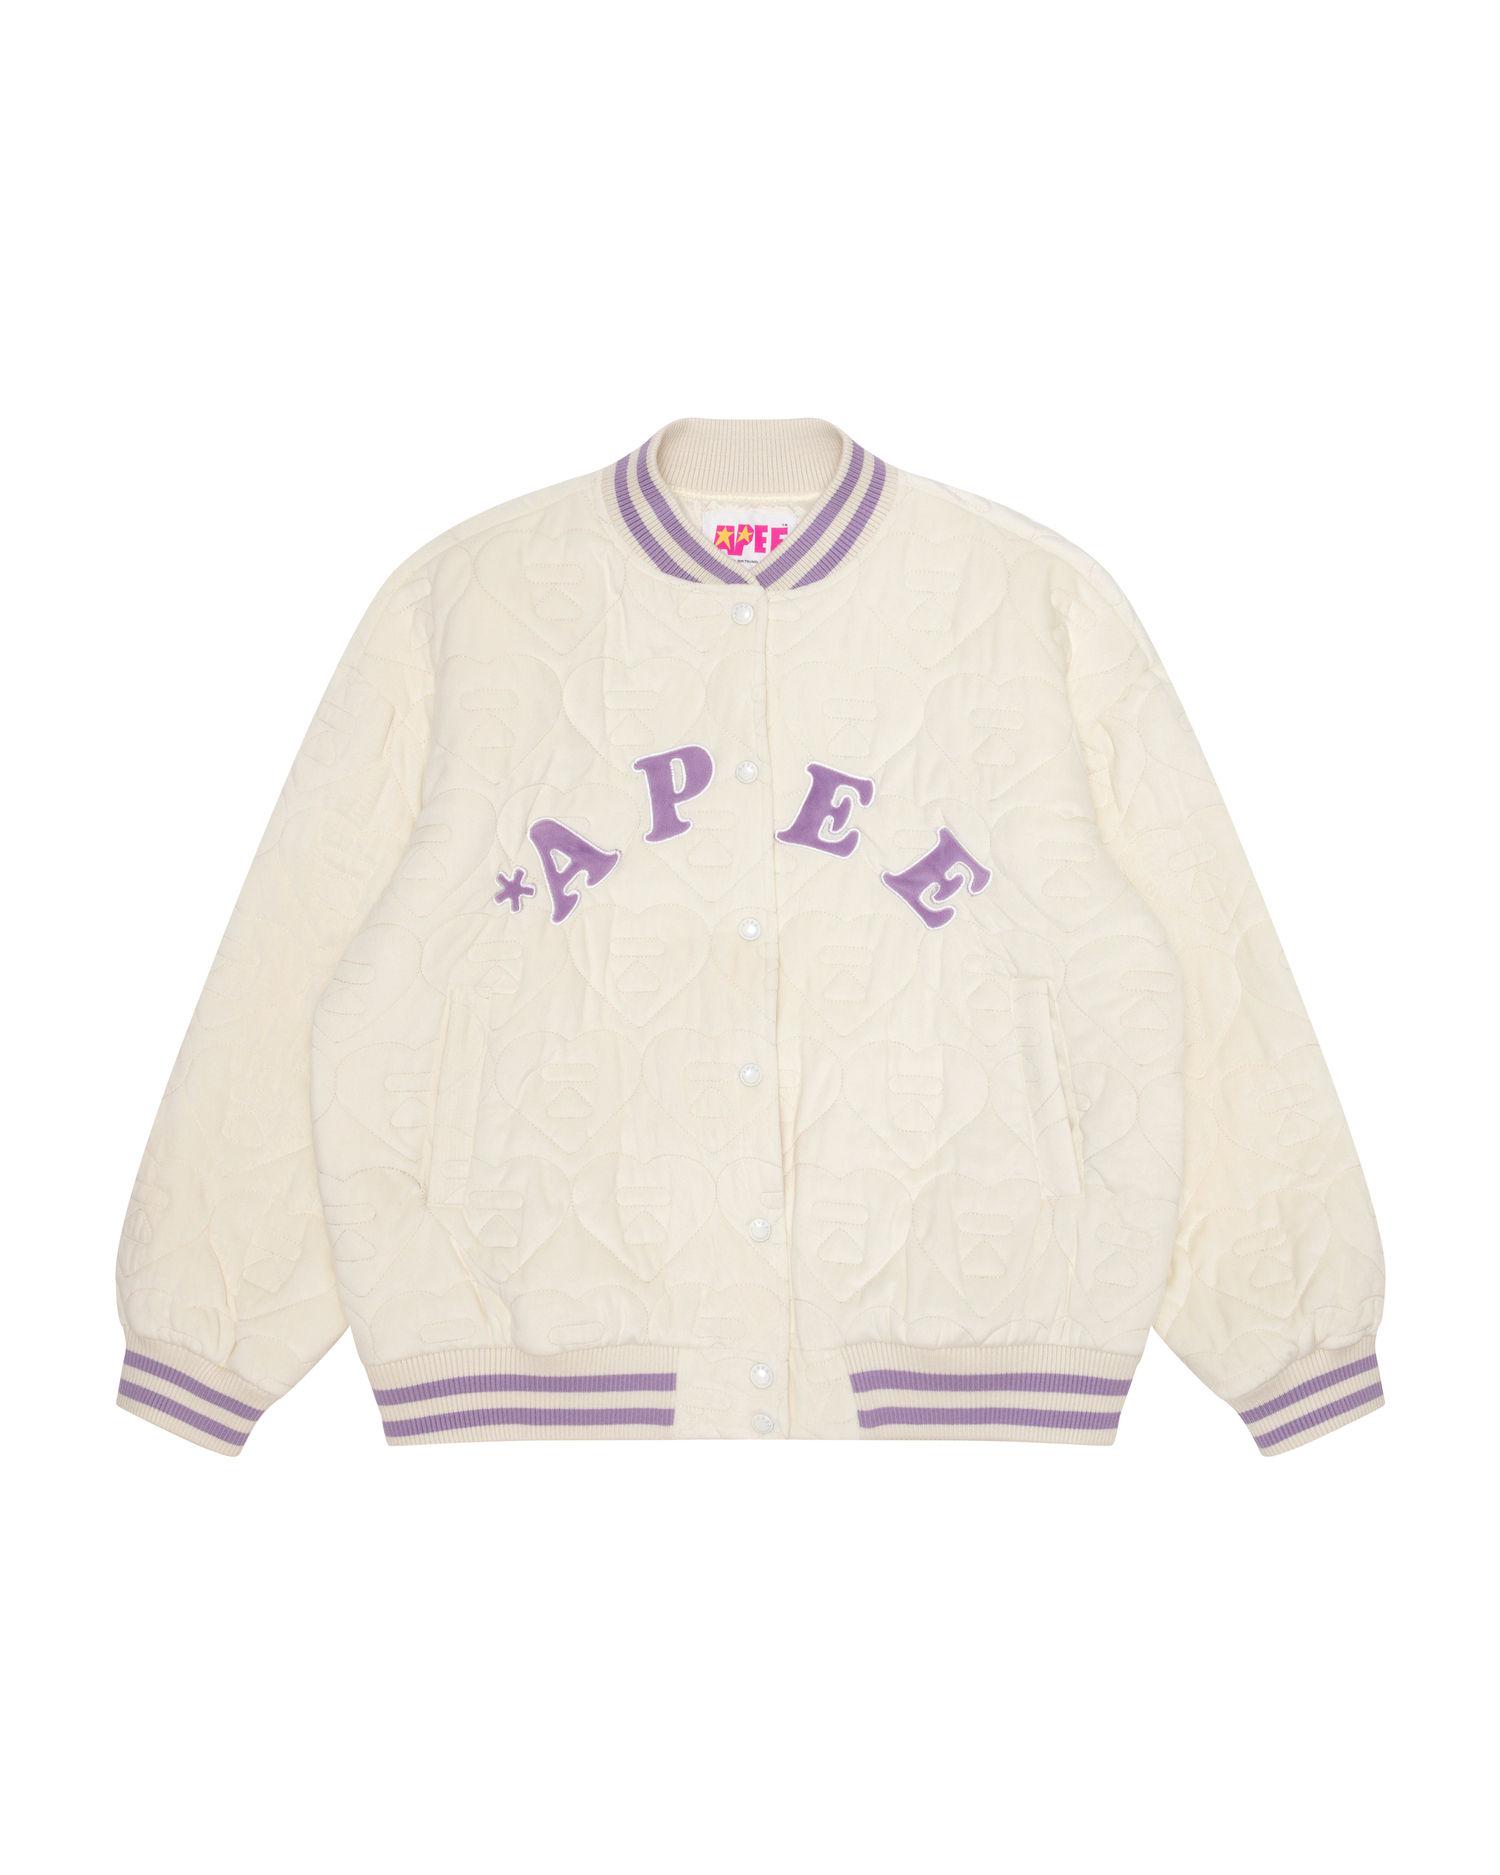 Quilted baseball jacket by APEE